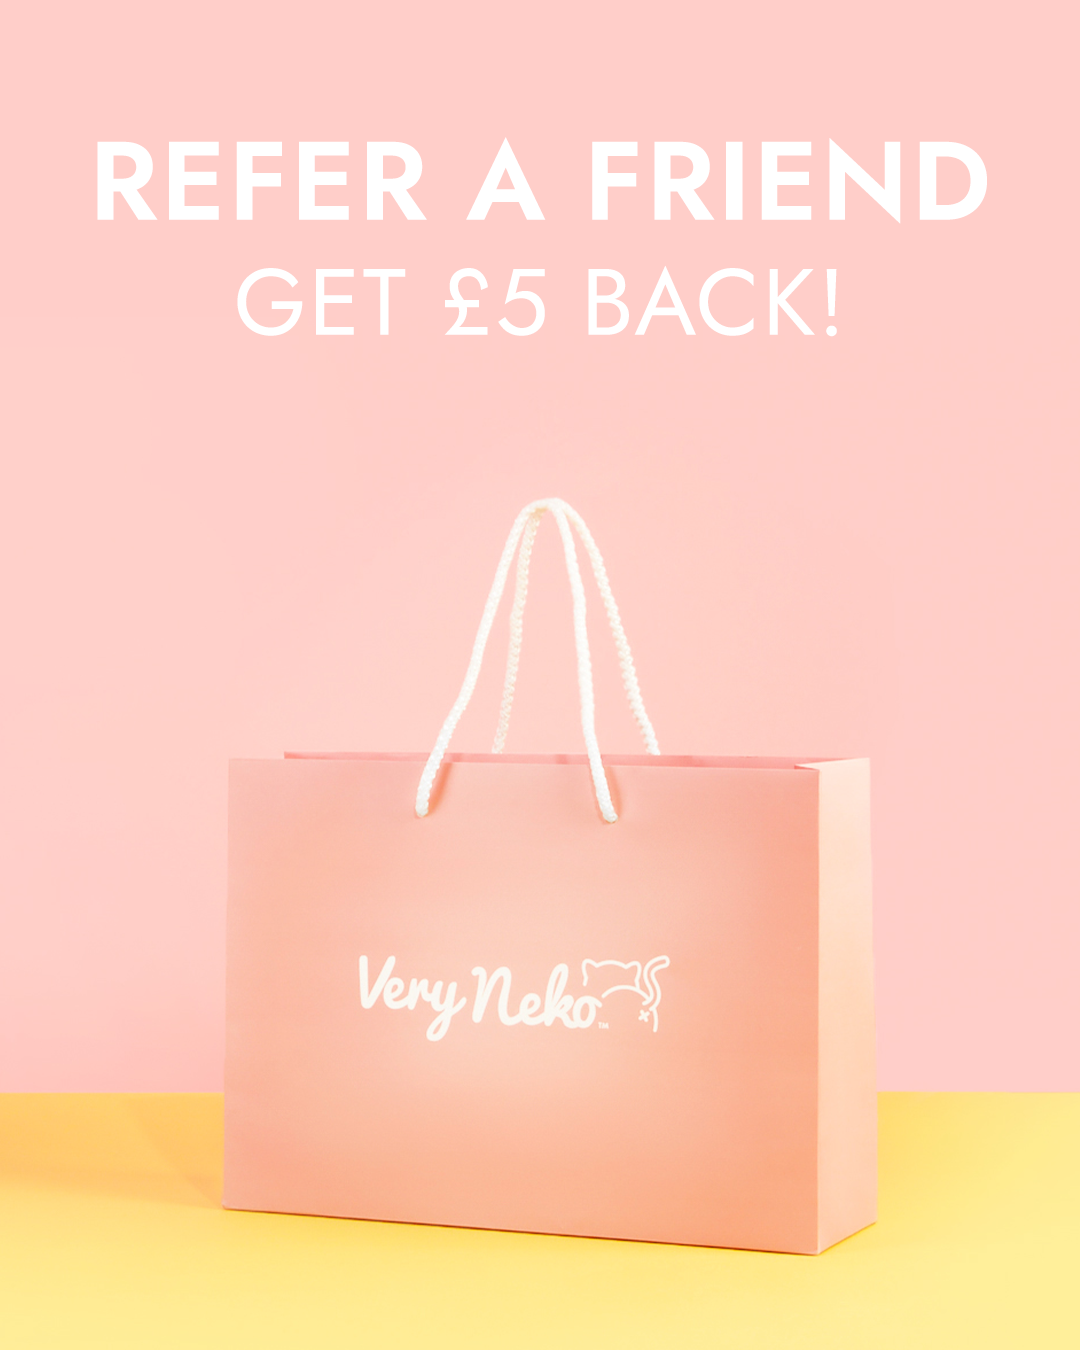 Refer a Friend and get £5 back